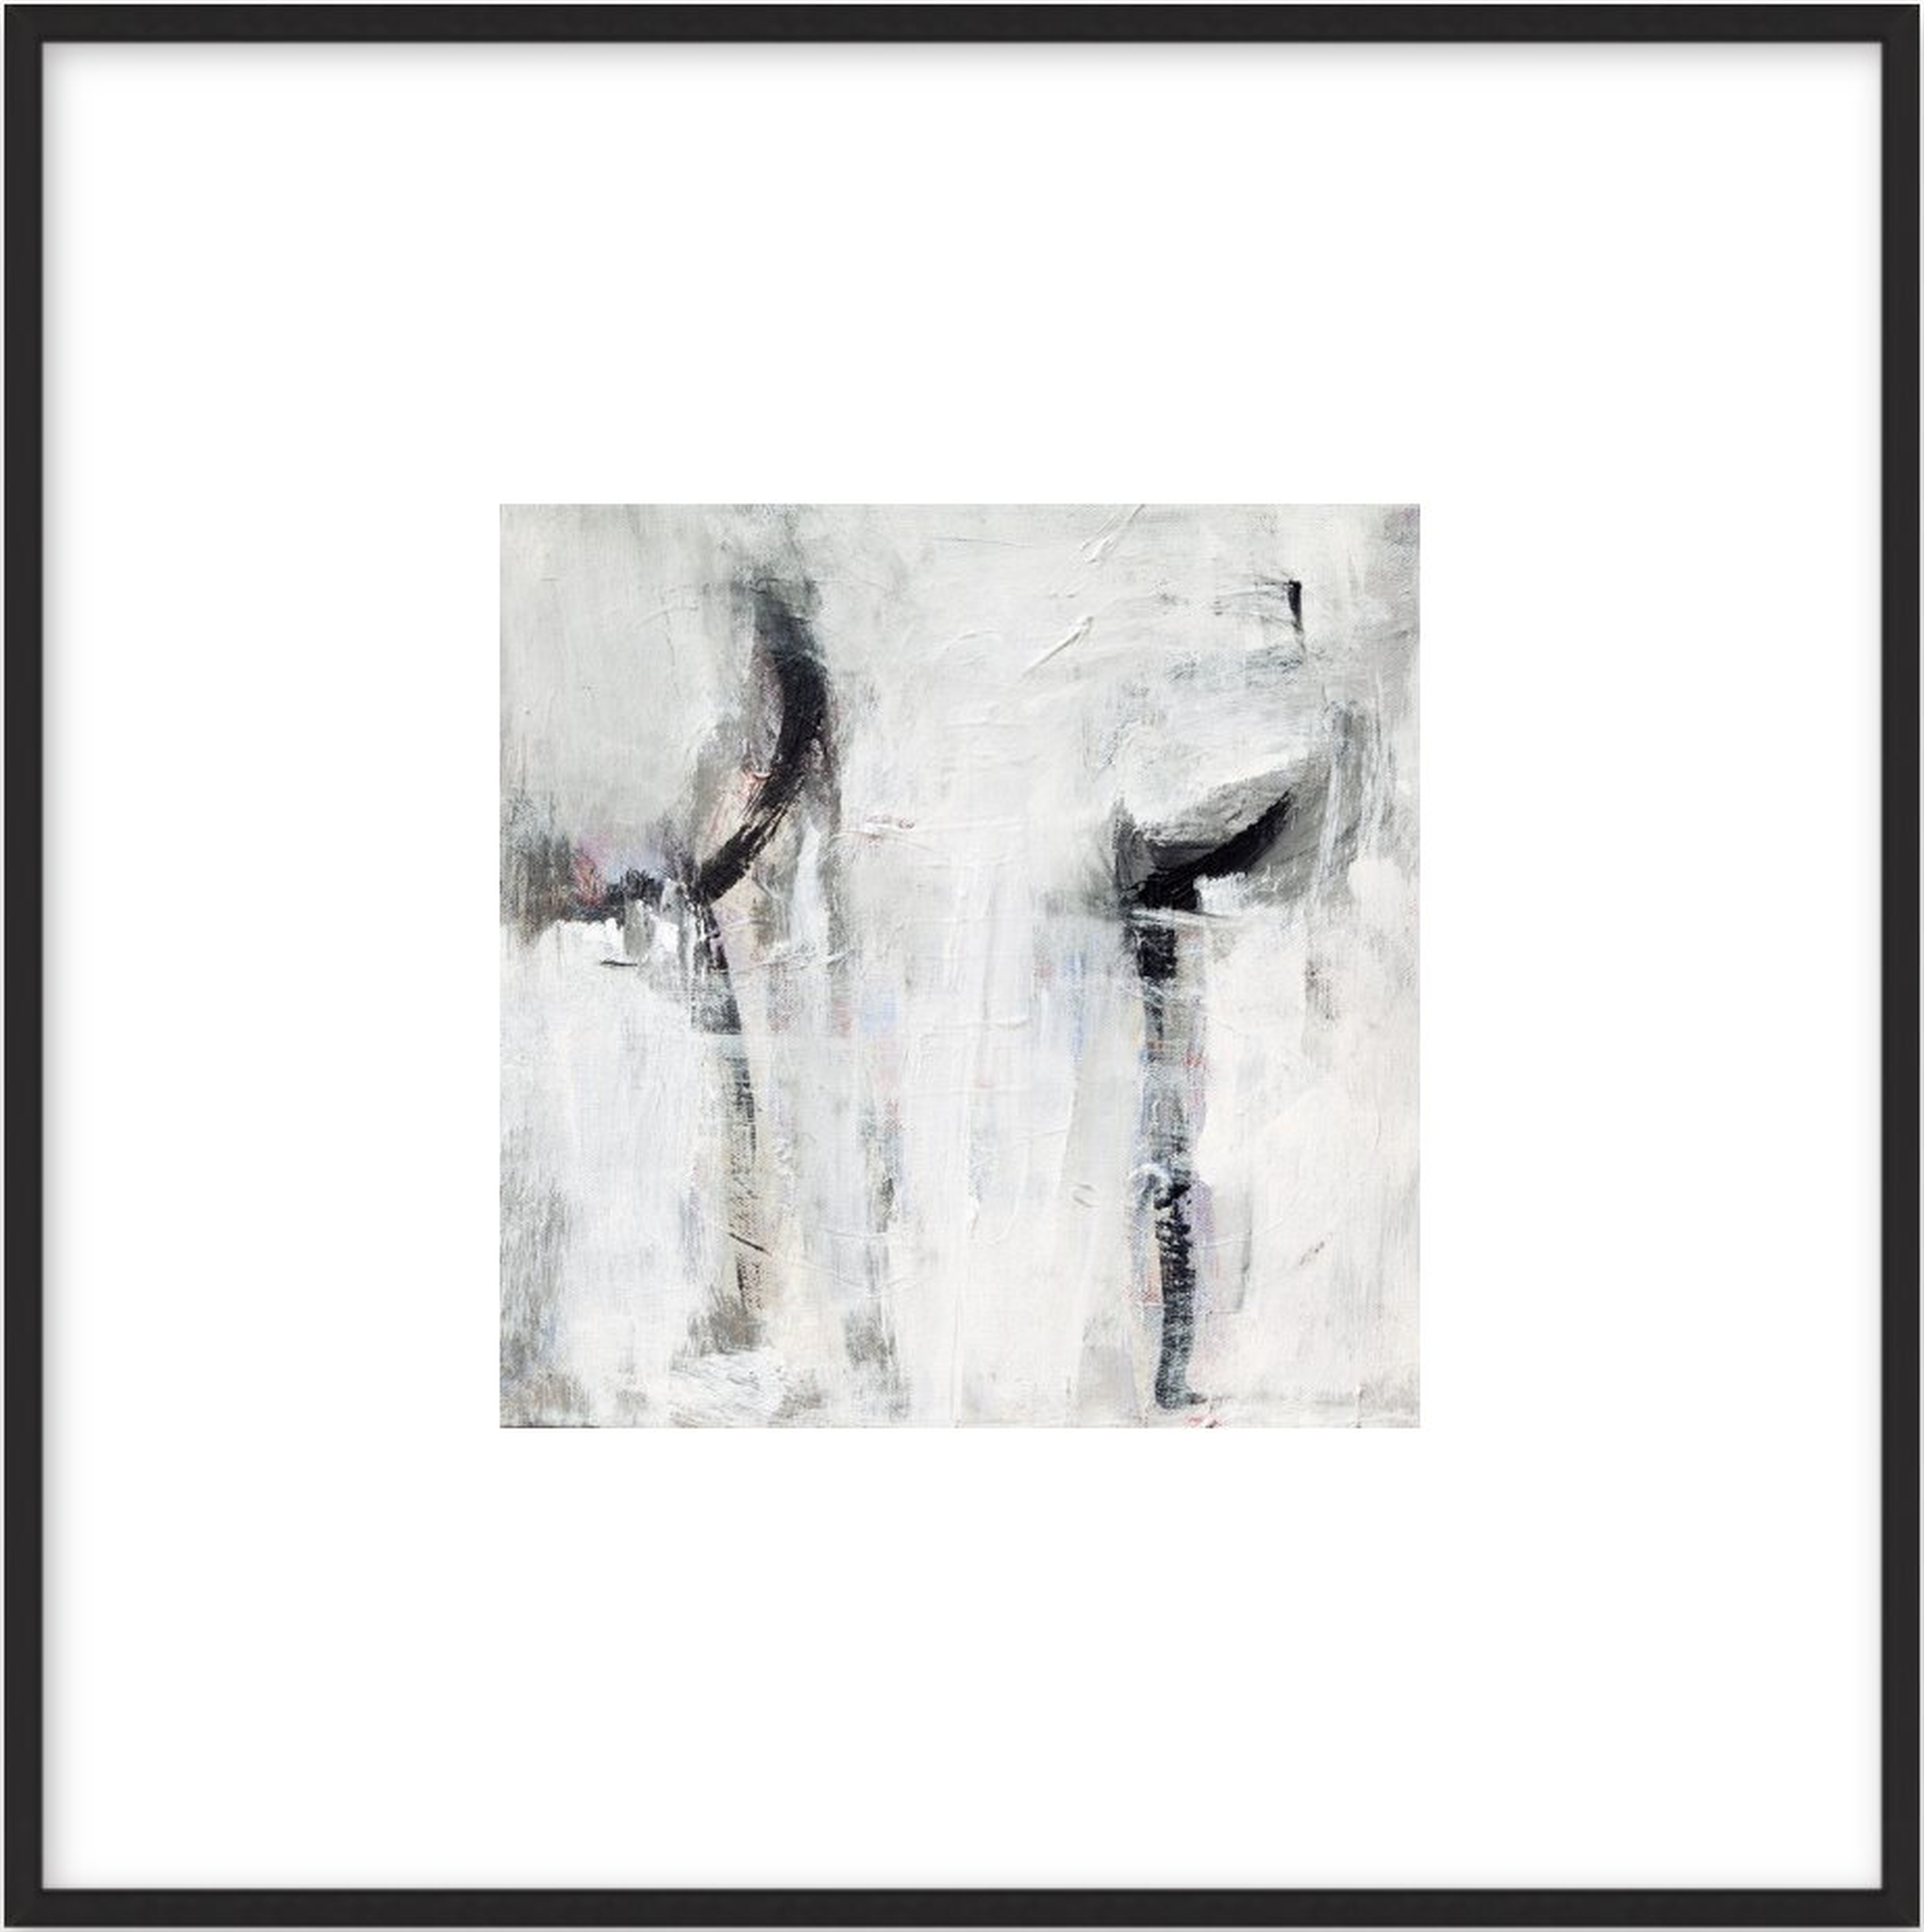 Untitled by Sara Knoll, 8"x8", black metal frame, with matte - Artfully Walls